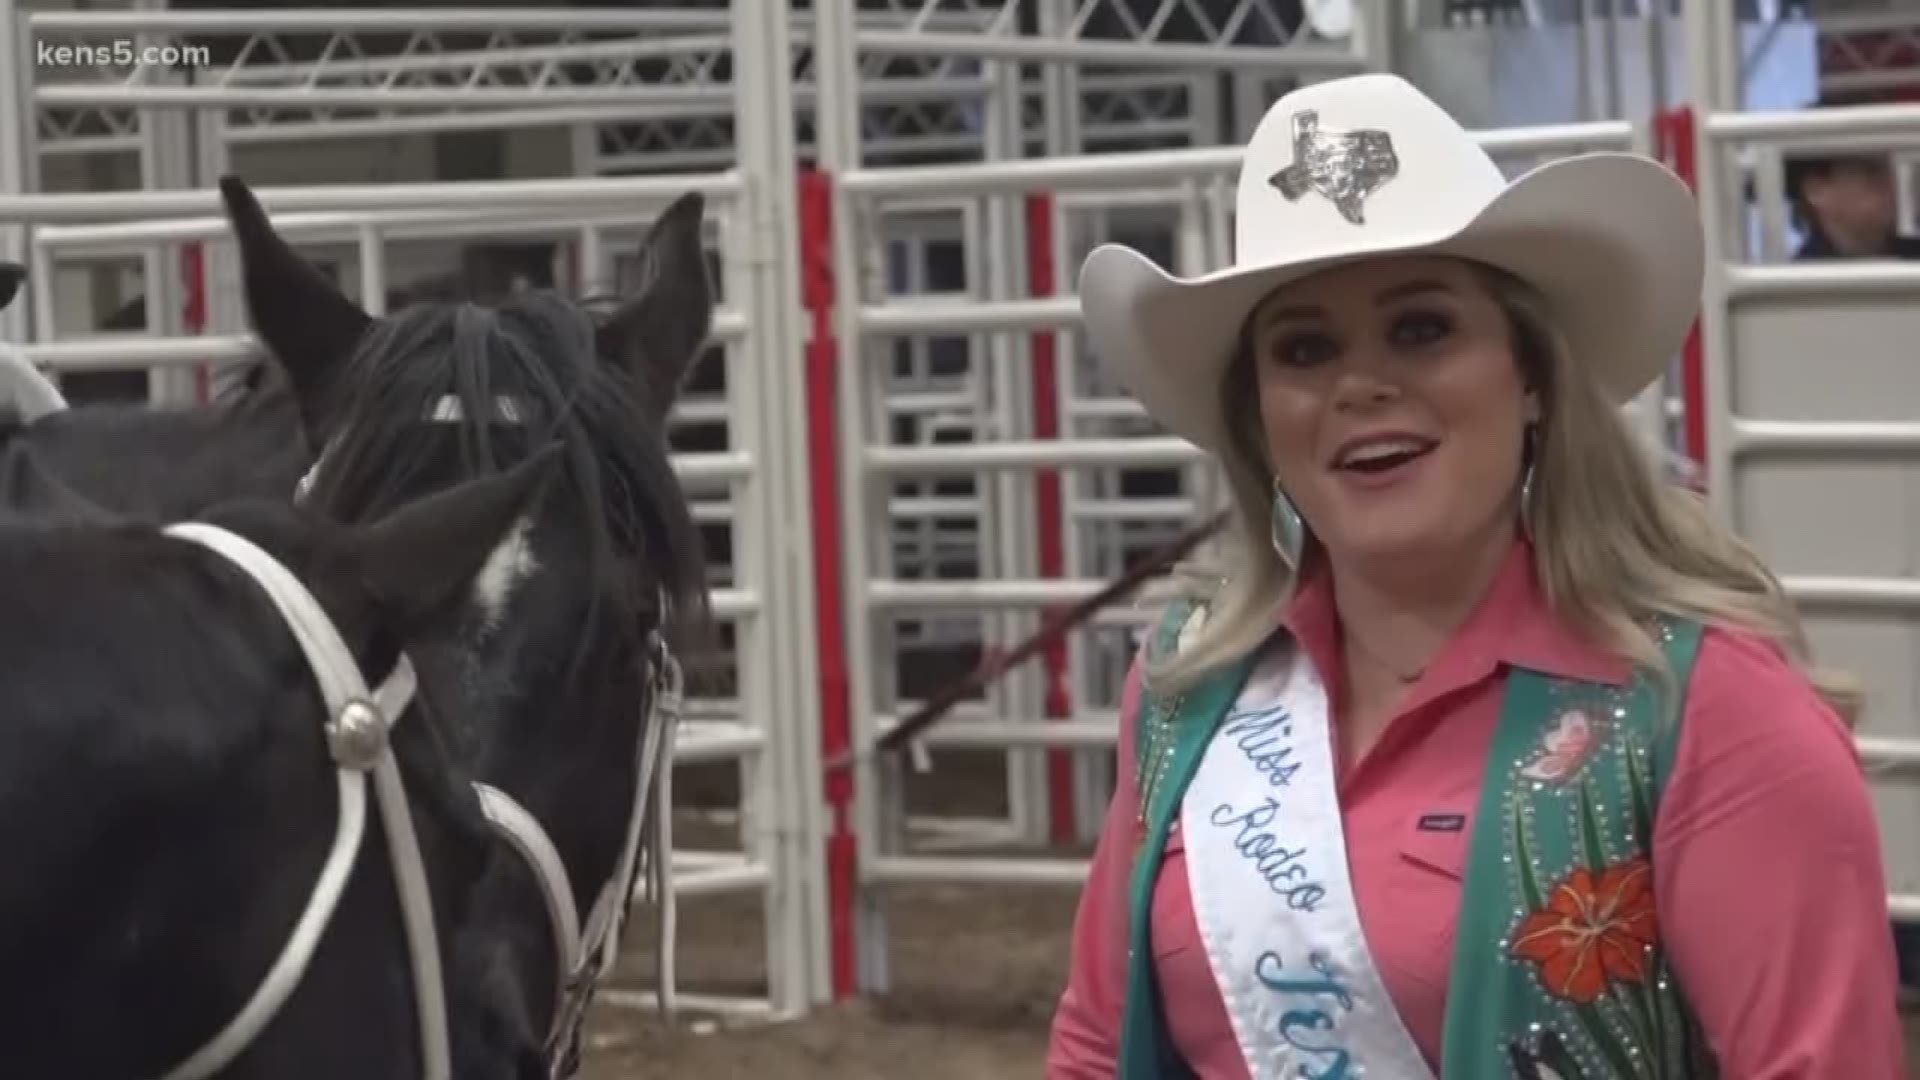 Jon Coker gets us Rodeo Ready by going behind the scenes with Miss Rodeo Texas.